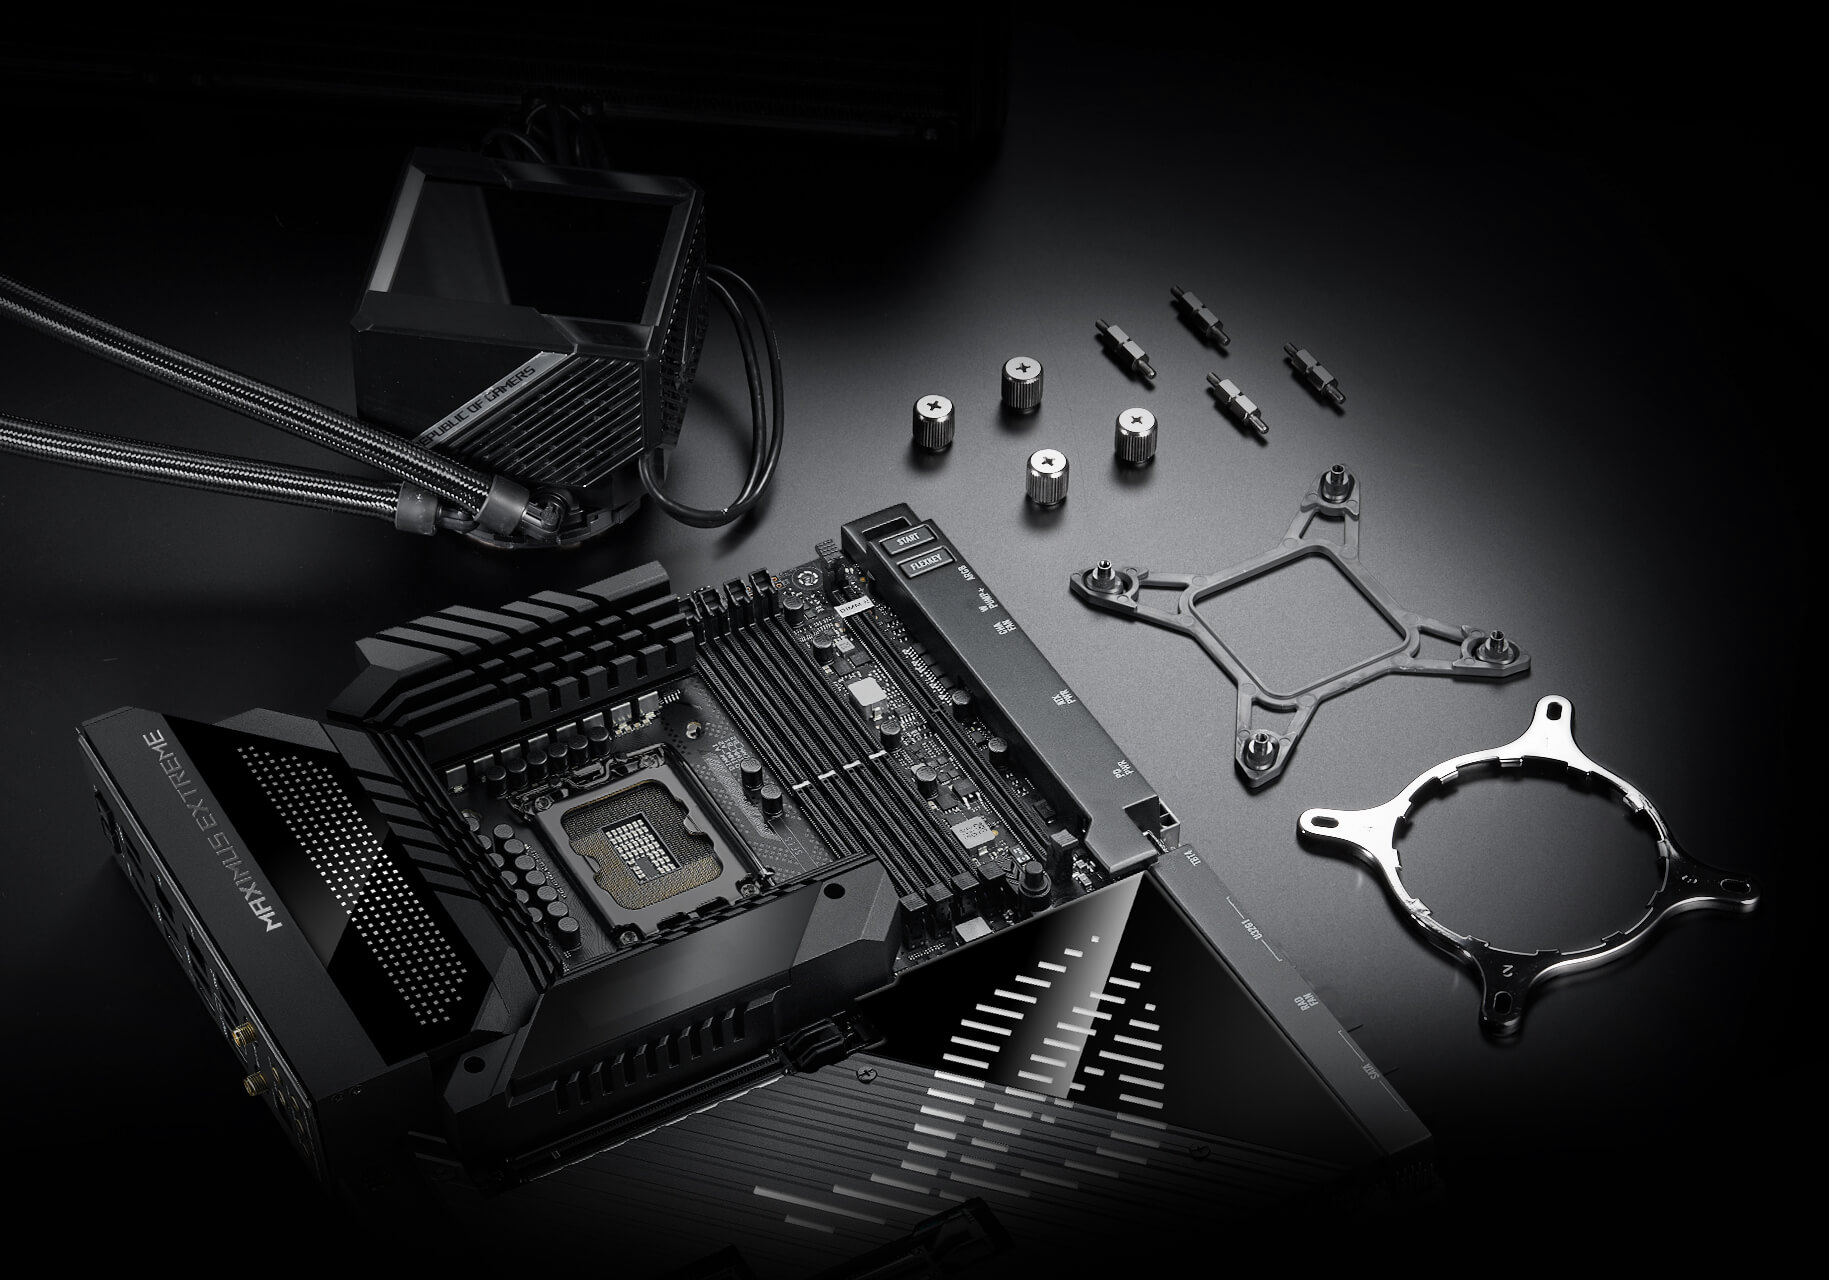 The ROG Maximus Z790 Extreme is compatible with all ASUS AIO coolers.